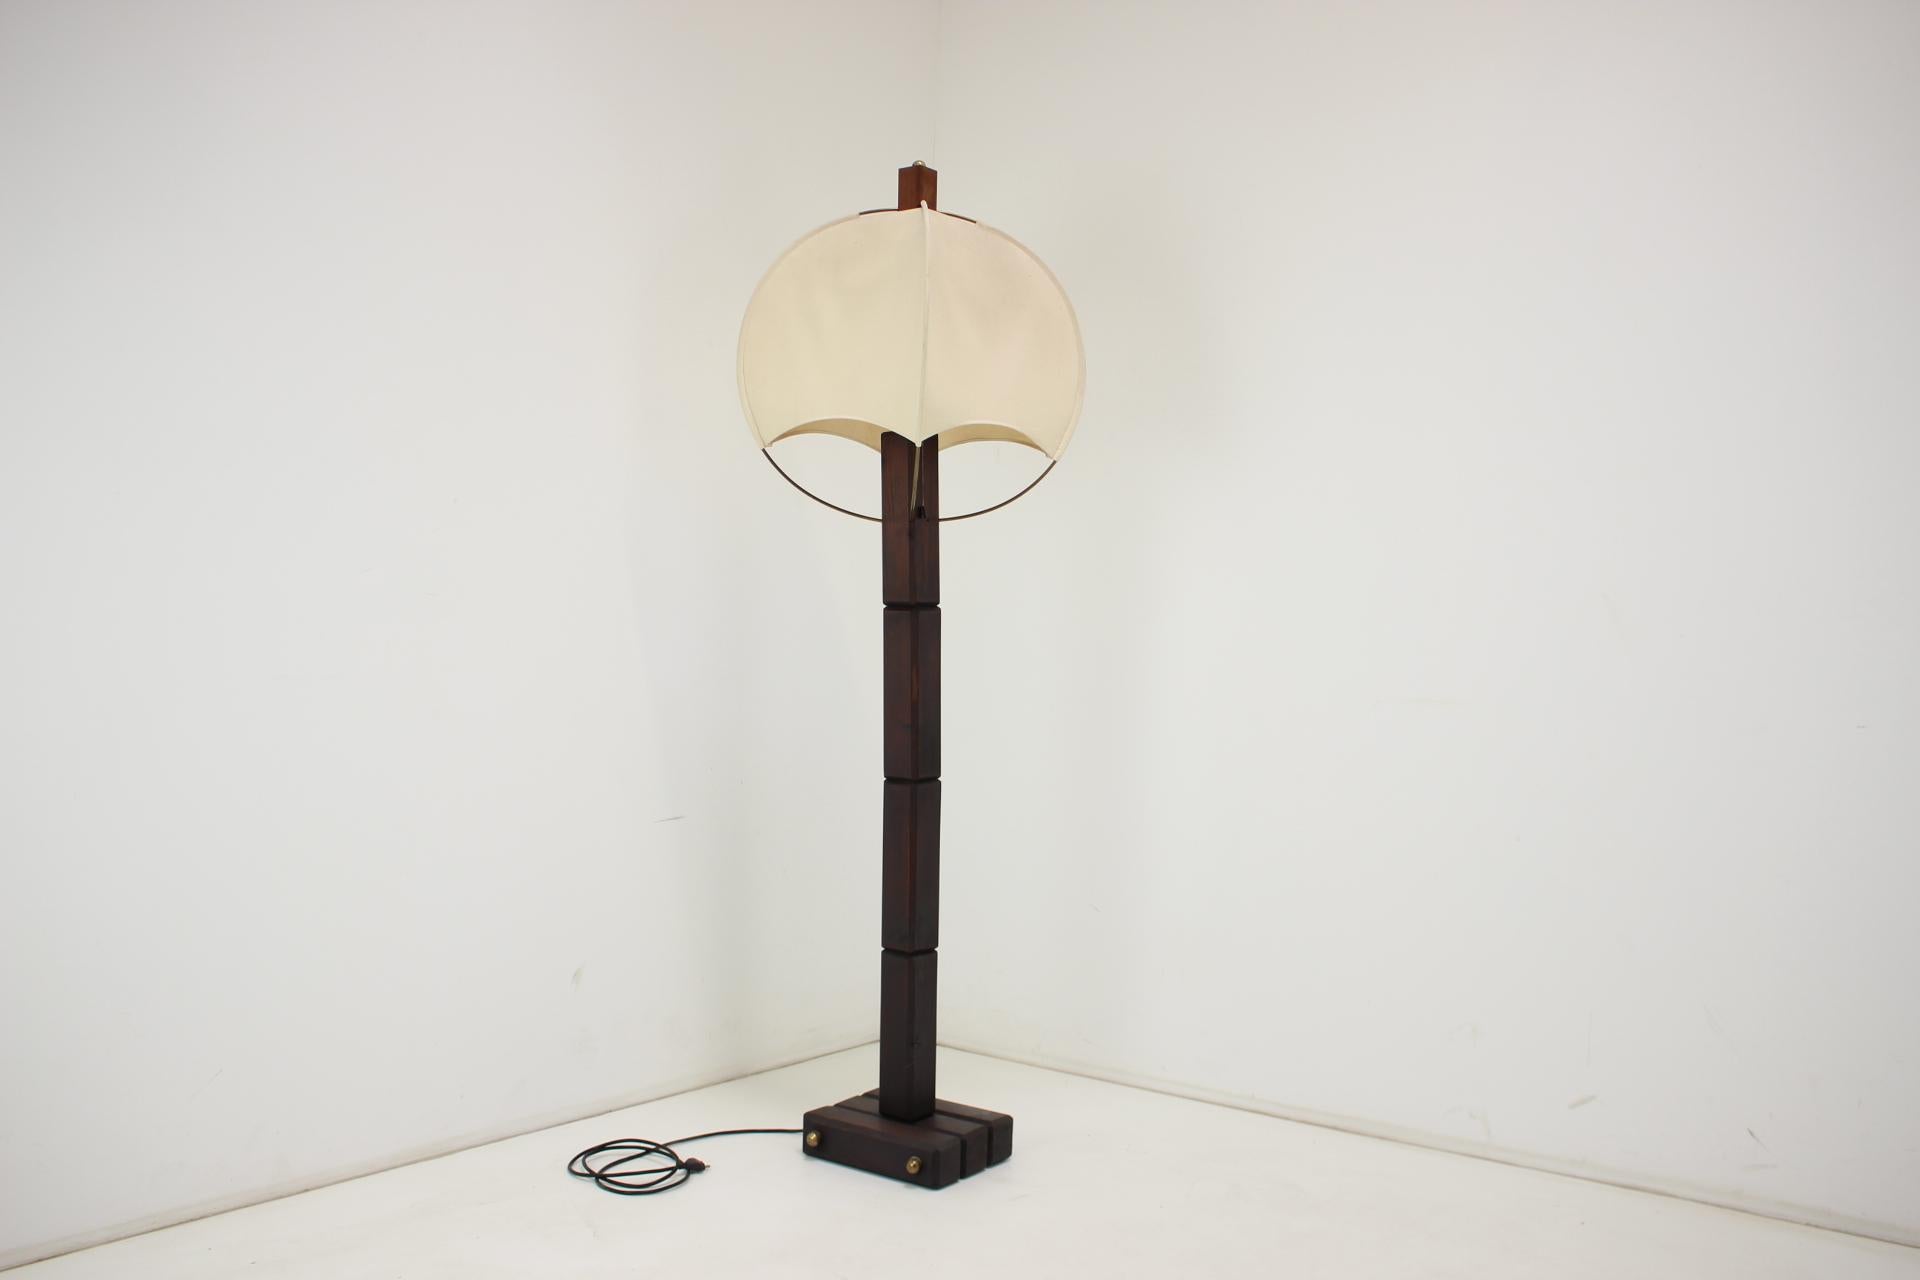 The floor lamp has some l stains on the fabric.
Made in Hungary in the 1970s.
Good original condition, with signs of use
Bulbs 1x40W, E25-E27
American plug adapter included